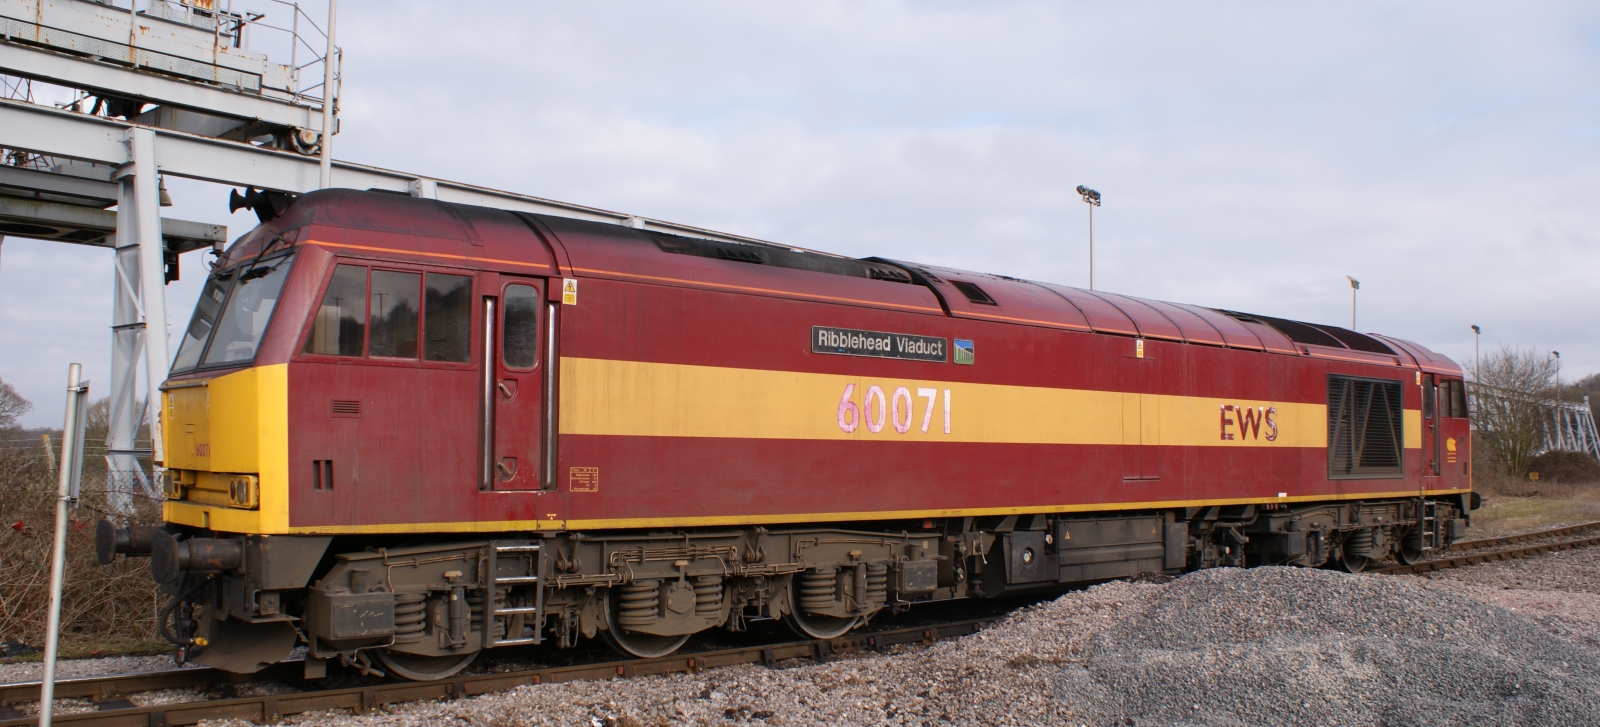 English, Welsh and Scottish Railway No. 60071 "Ribblehead Viaduct" in March 2010 at the Murco Oil Depot